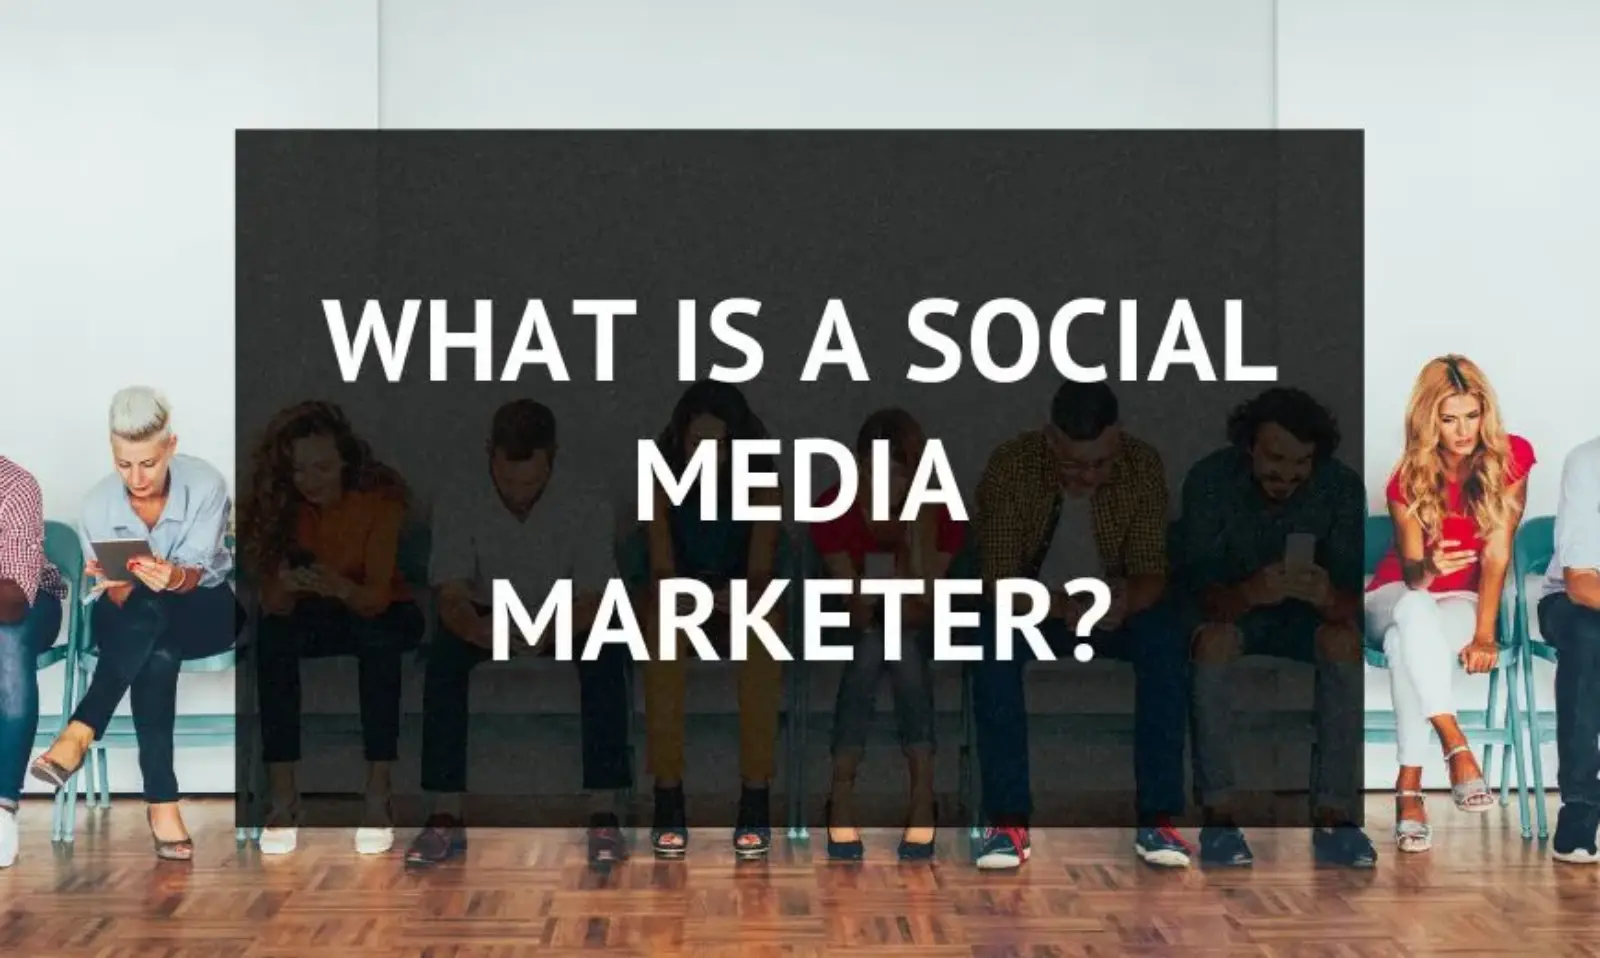 What is a social media marketer?